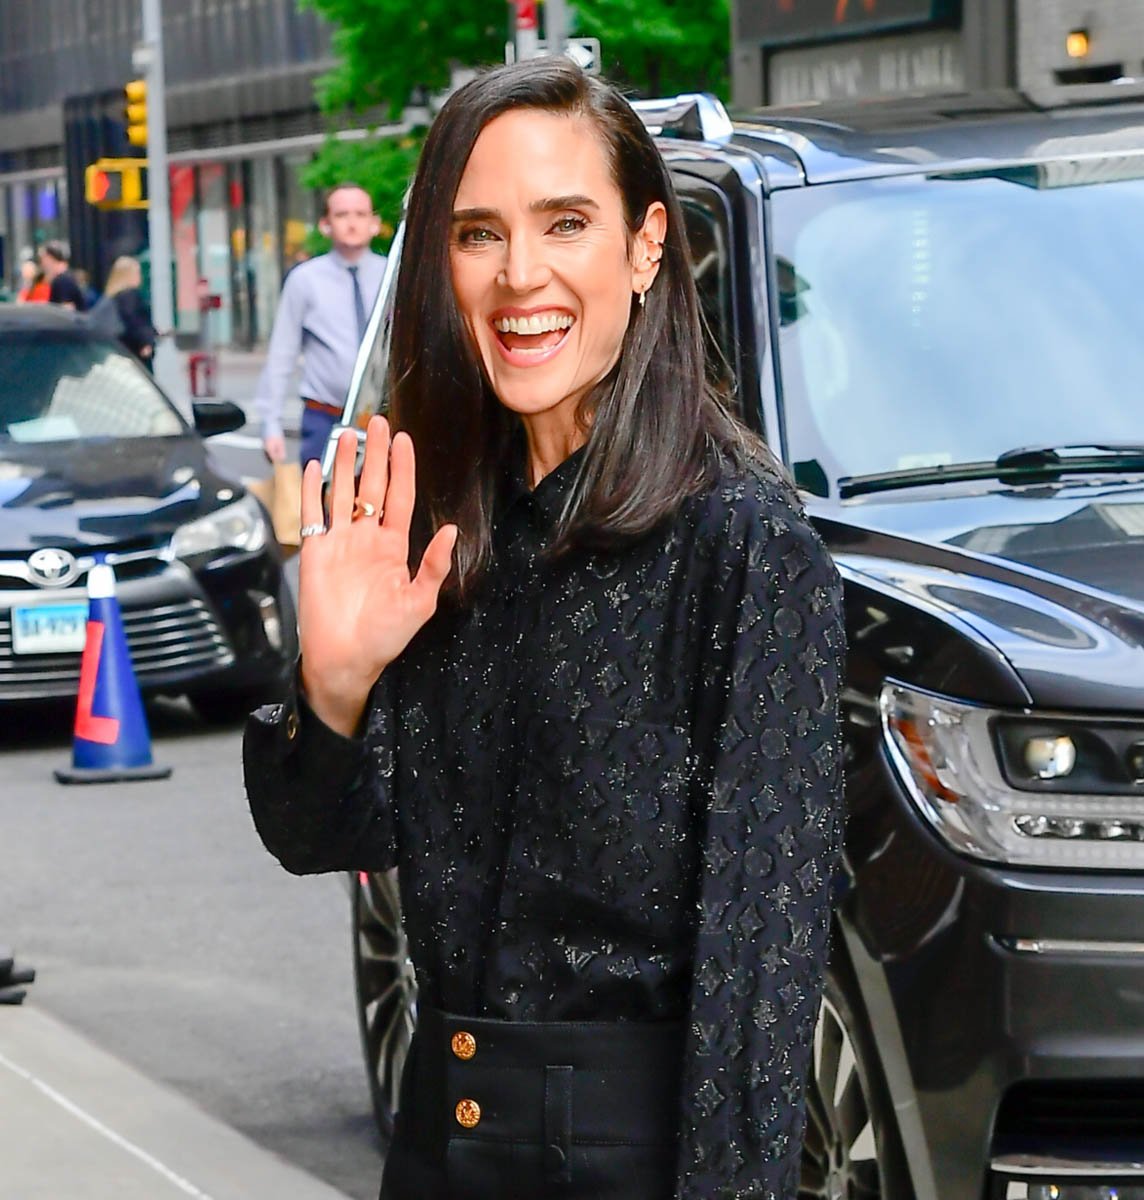 Jennifer Connelly in Louis Vuitton at The Late Show with Stephen Colbert &  Good Morning America